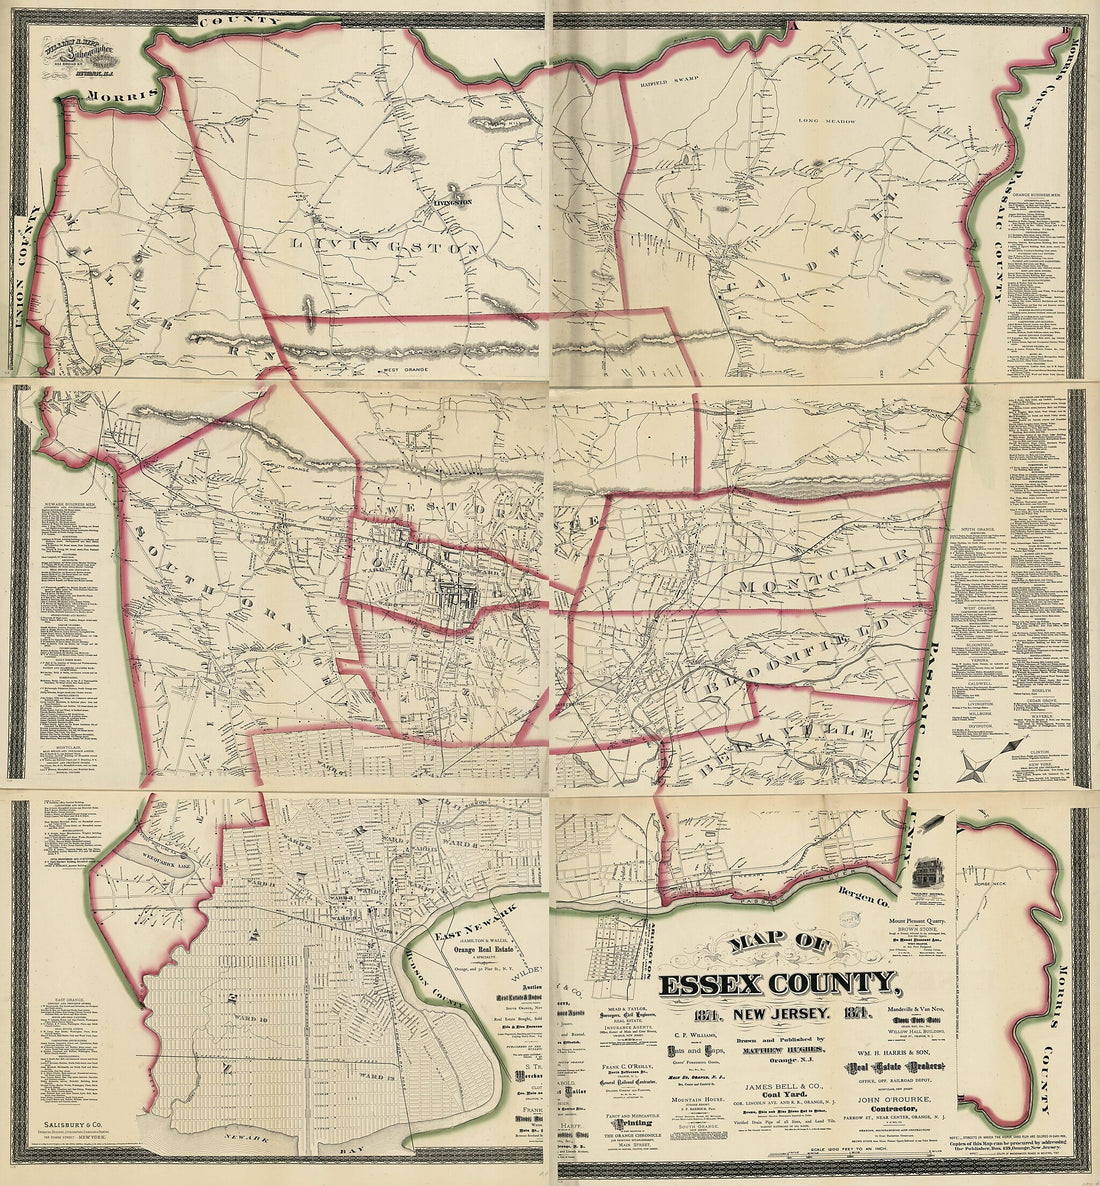 This old map of Map of Essex County, New Jersey : from 1874 was created by Matthew Hughes in 1874